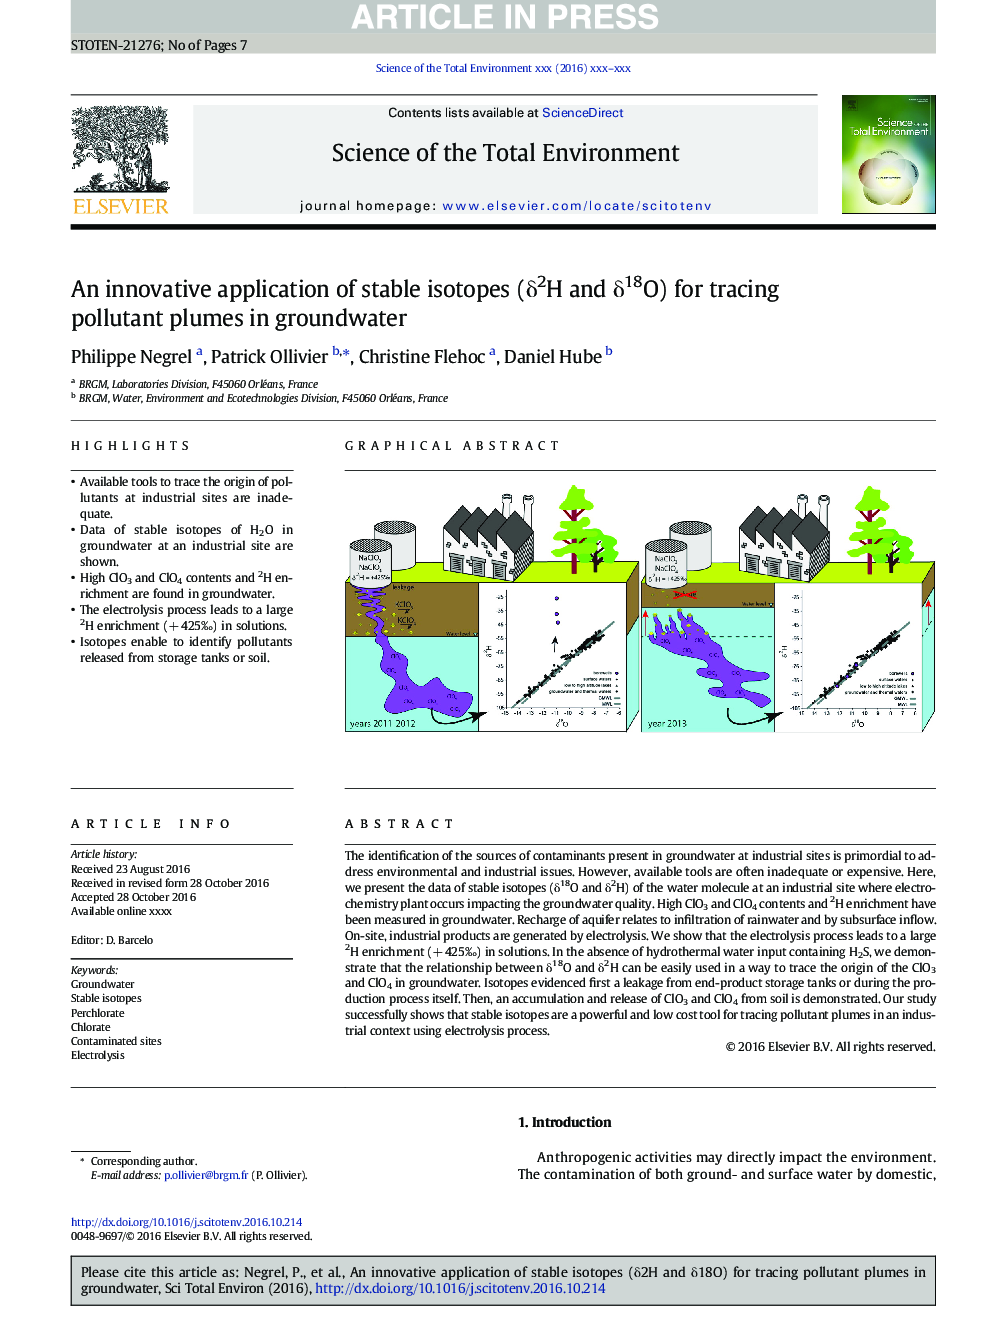 An innovative application of stable isotopes (Î´2H and Î´18O) for tracing pollutant plumes in groundwater